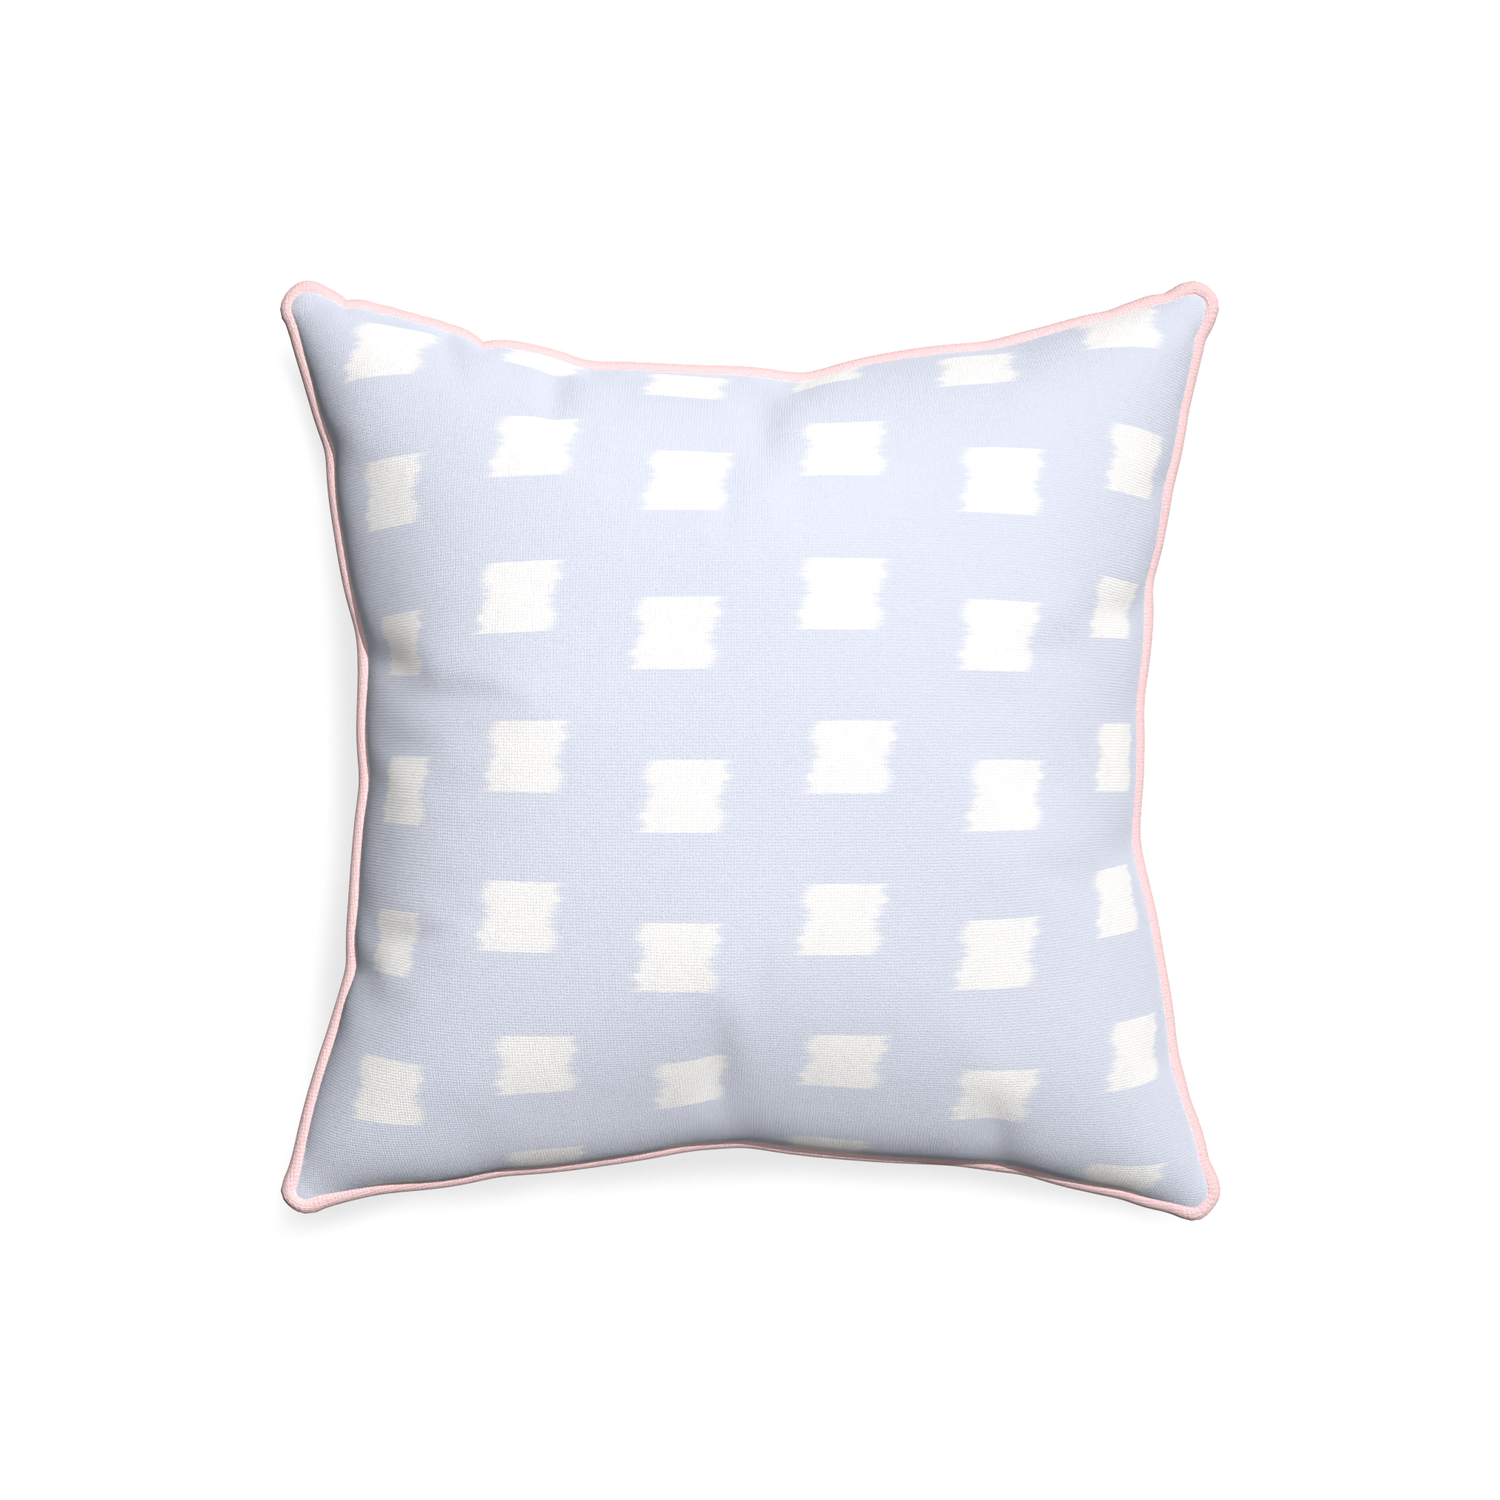 20-square denton custom sky blue patternpillow with petal piping on white background